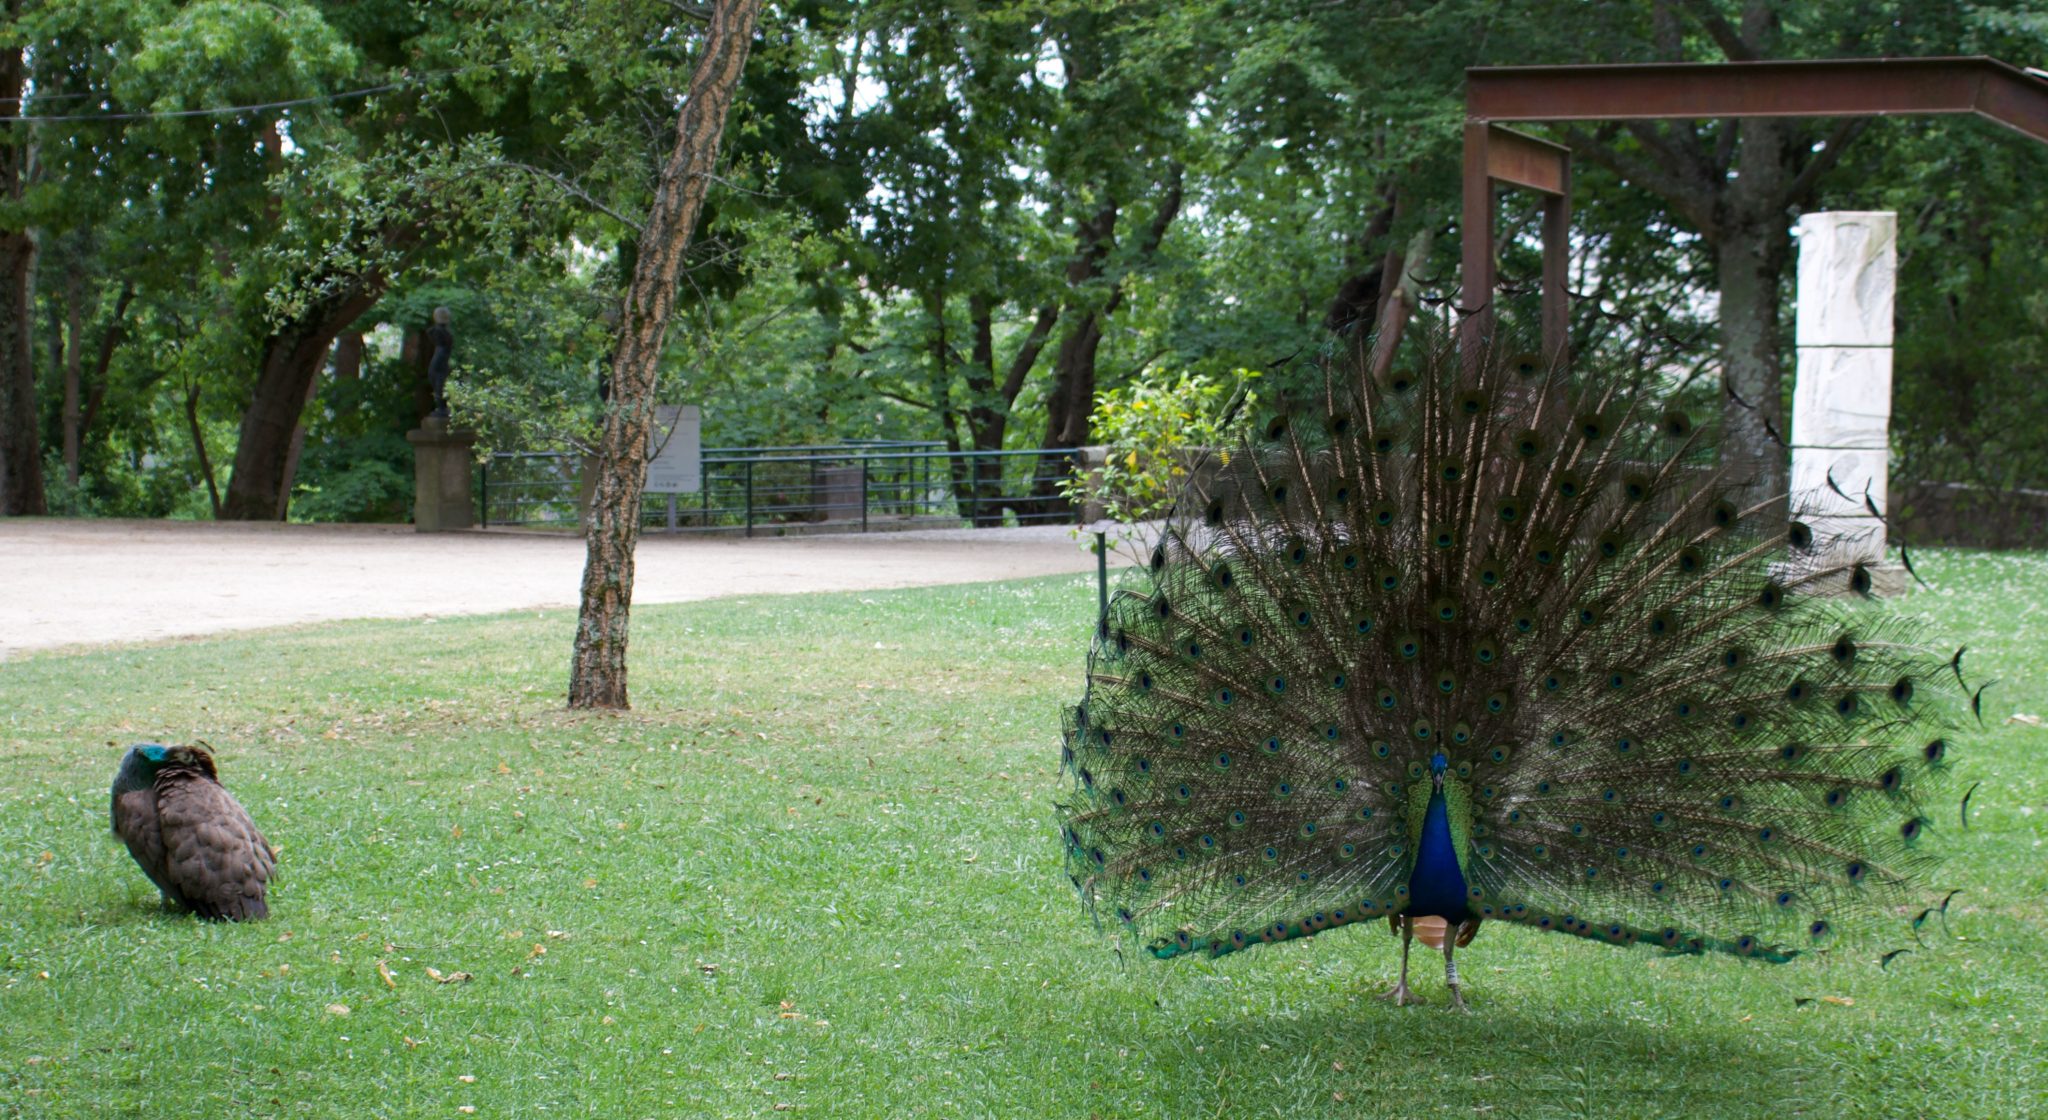 Peacocks with feathers displayed